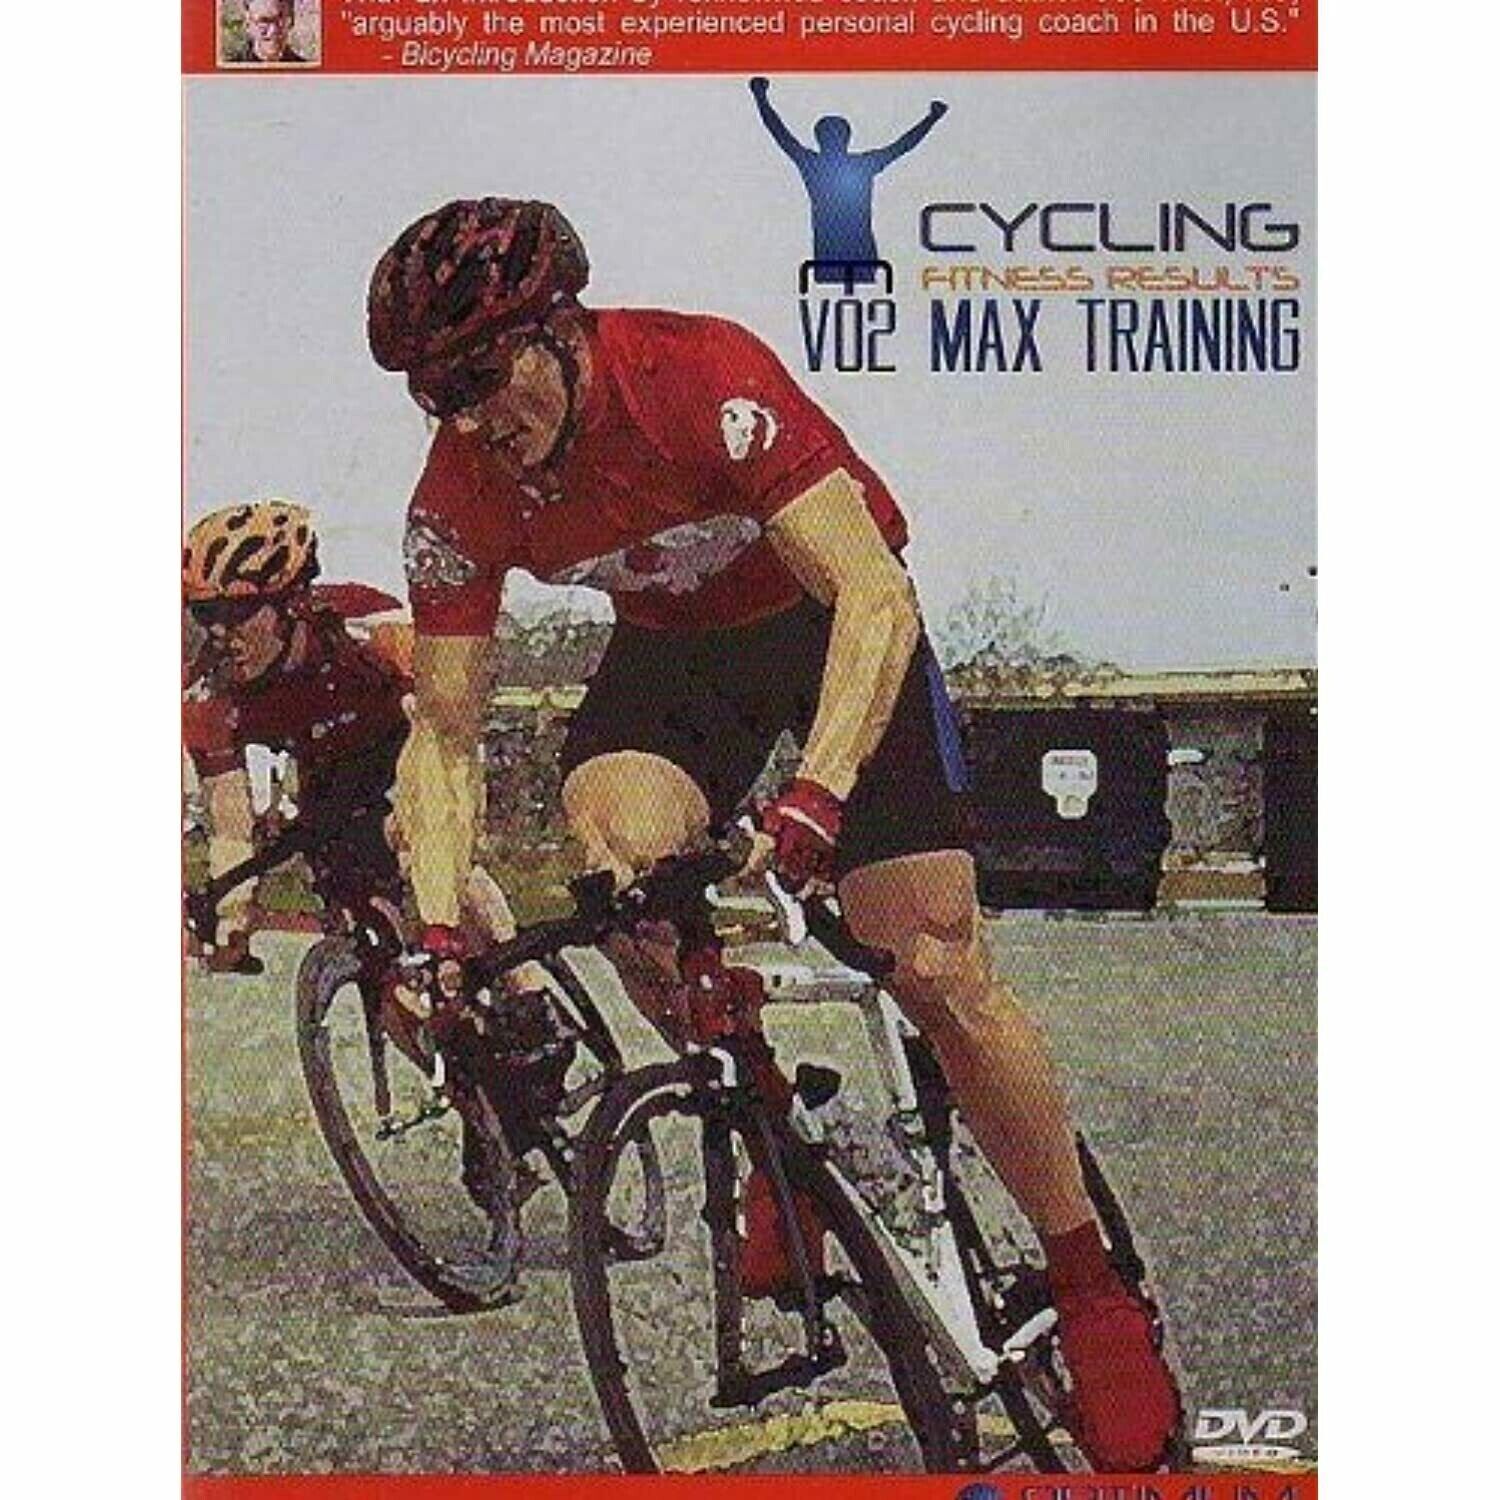 NEW V02 Max Training by Cycling Fitness Results DVD